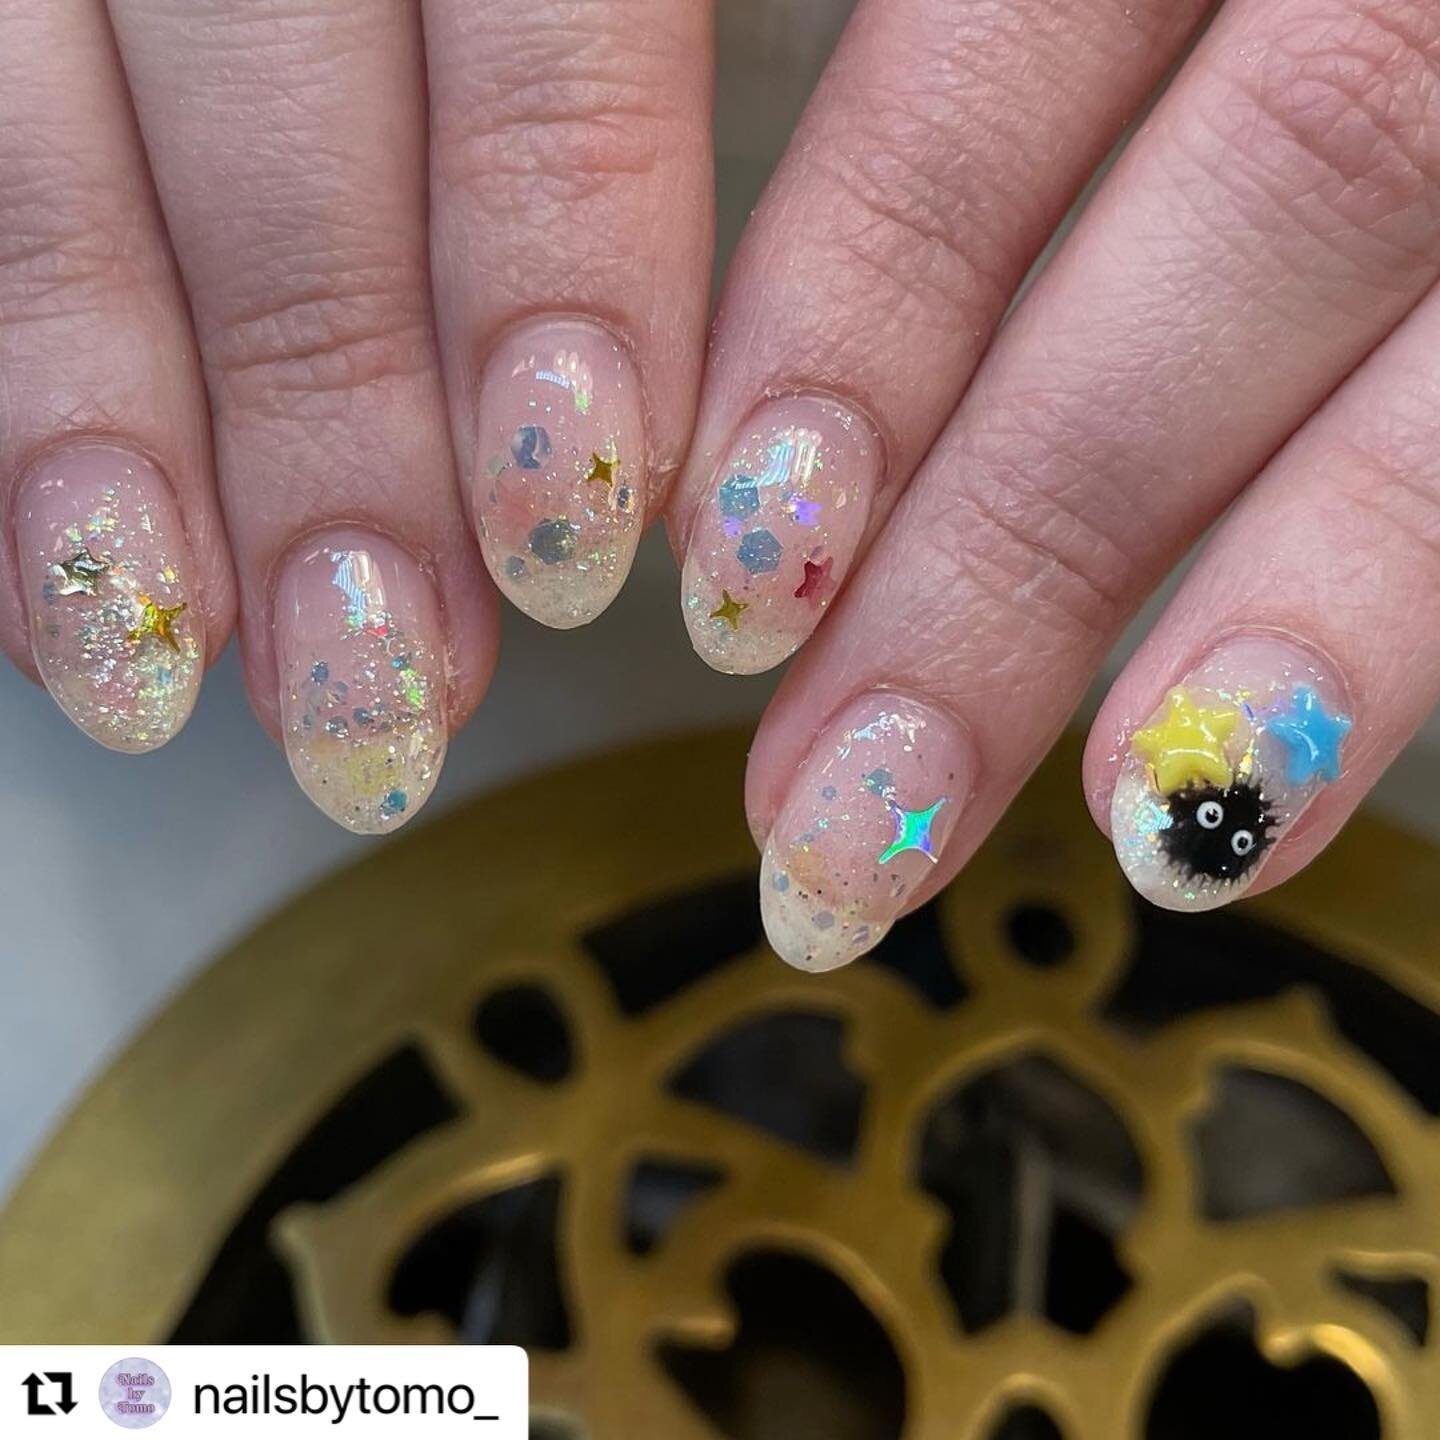 Make sure to get your appointments in with Tomo before she leaves at the end of April! 

#Repost @nailsbytomo_ with @use.repost
・・・
Soot sprite has sugar candies💛💙

#sootsprites #sootspritenails #spritedaway #spritedawaynails #まっくろくろすけネイル #金平糖ネイル #